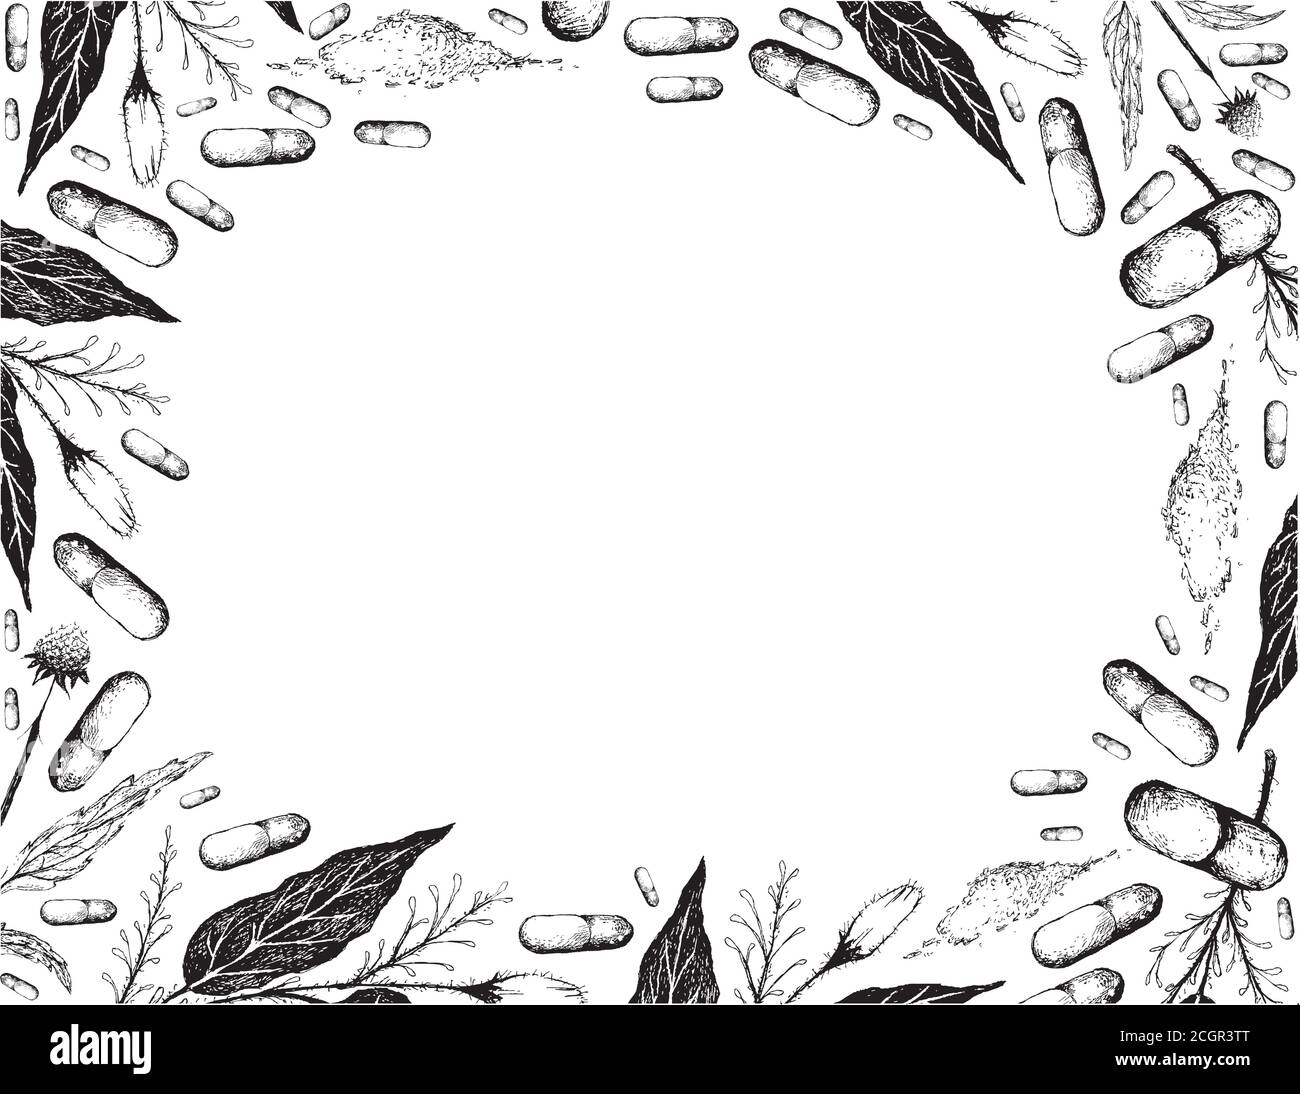 Vegetable and Herb, Hand Drawn Illustration Frame of Kariyat or Andrographis Paniculata Plants with Echinacea or Coneflowers Plants. Stock Vector